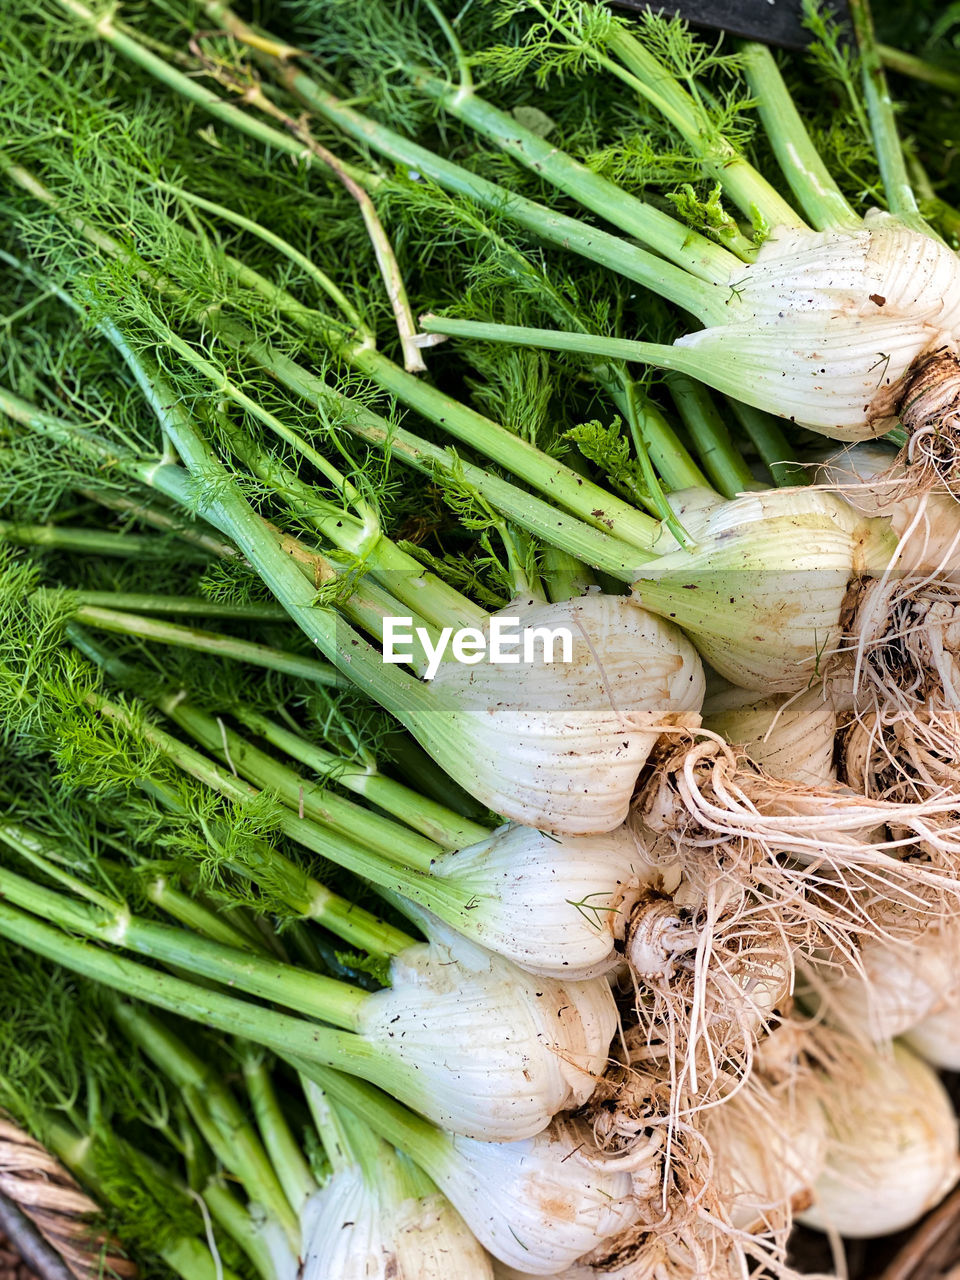 Whole fennel with roots for sale at farmers market in cape town, south africa